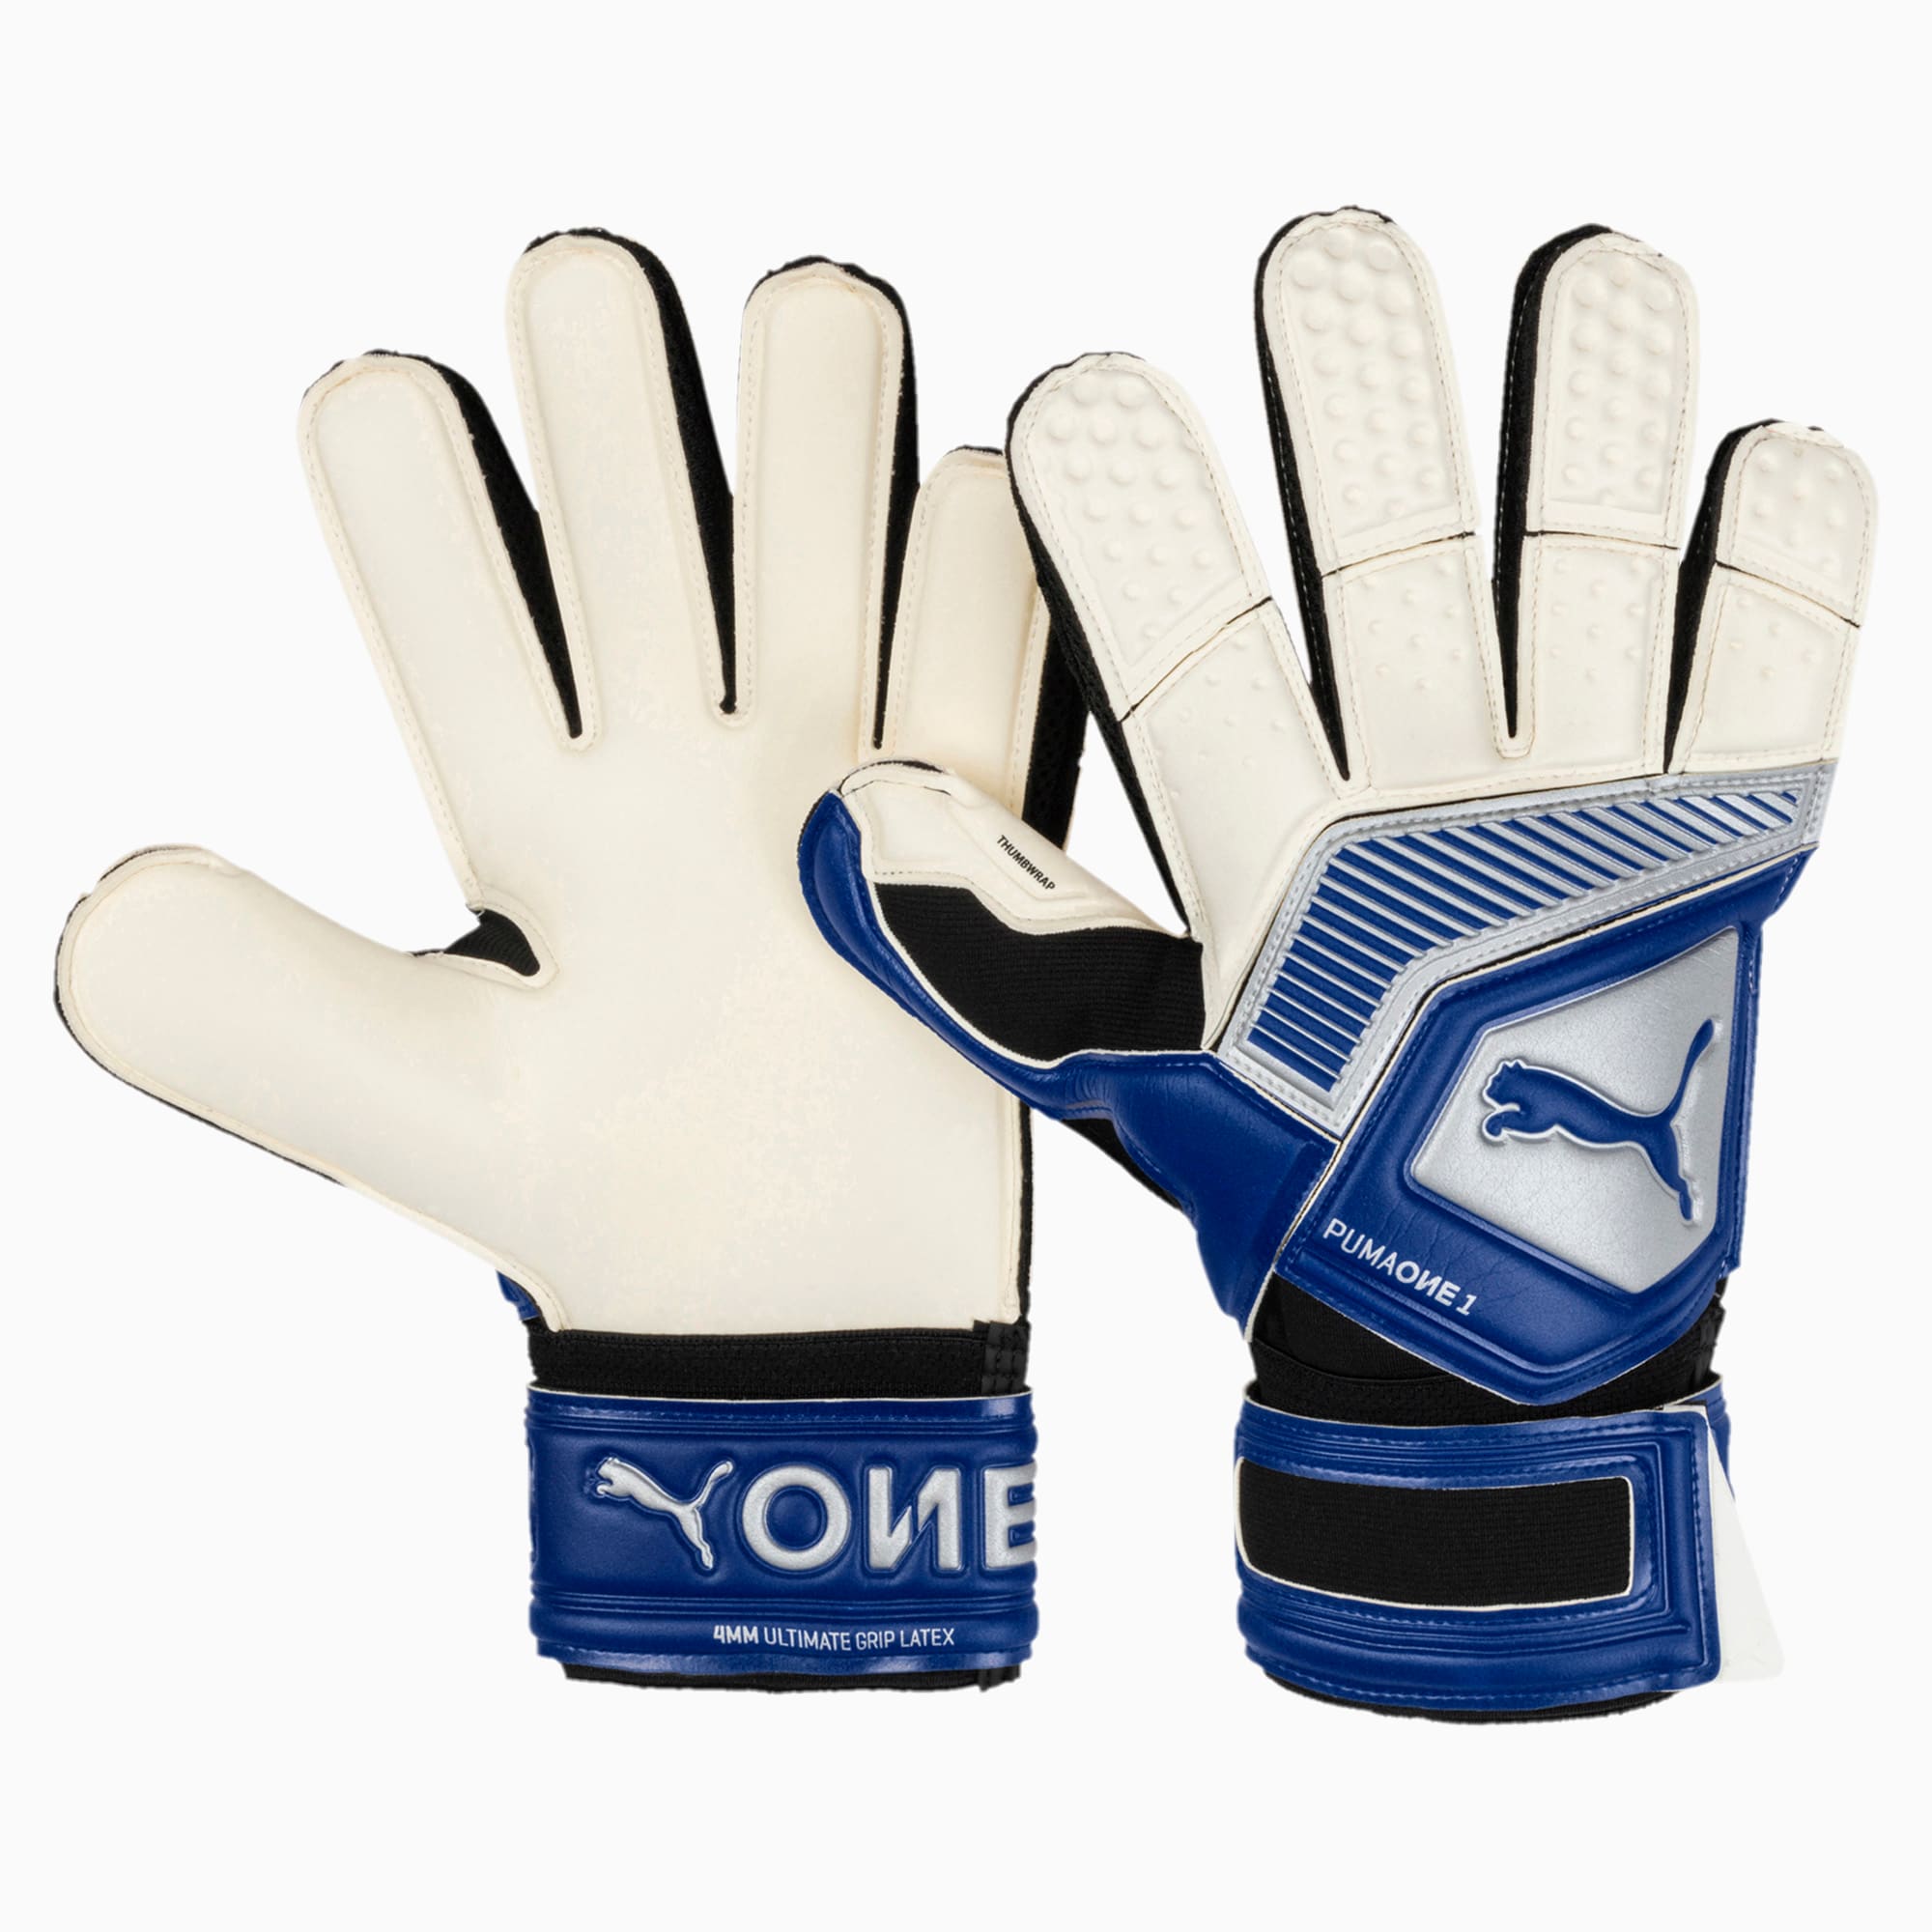 puma goalkeeper gloves with finger protection